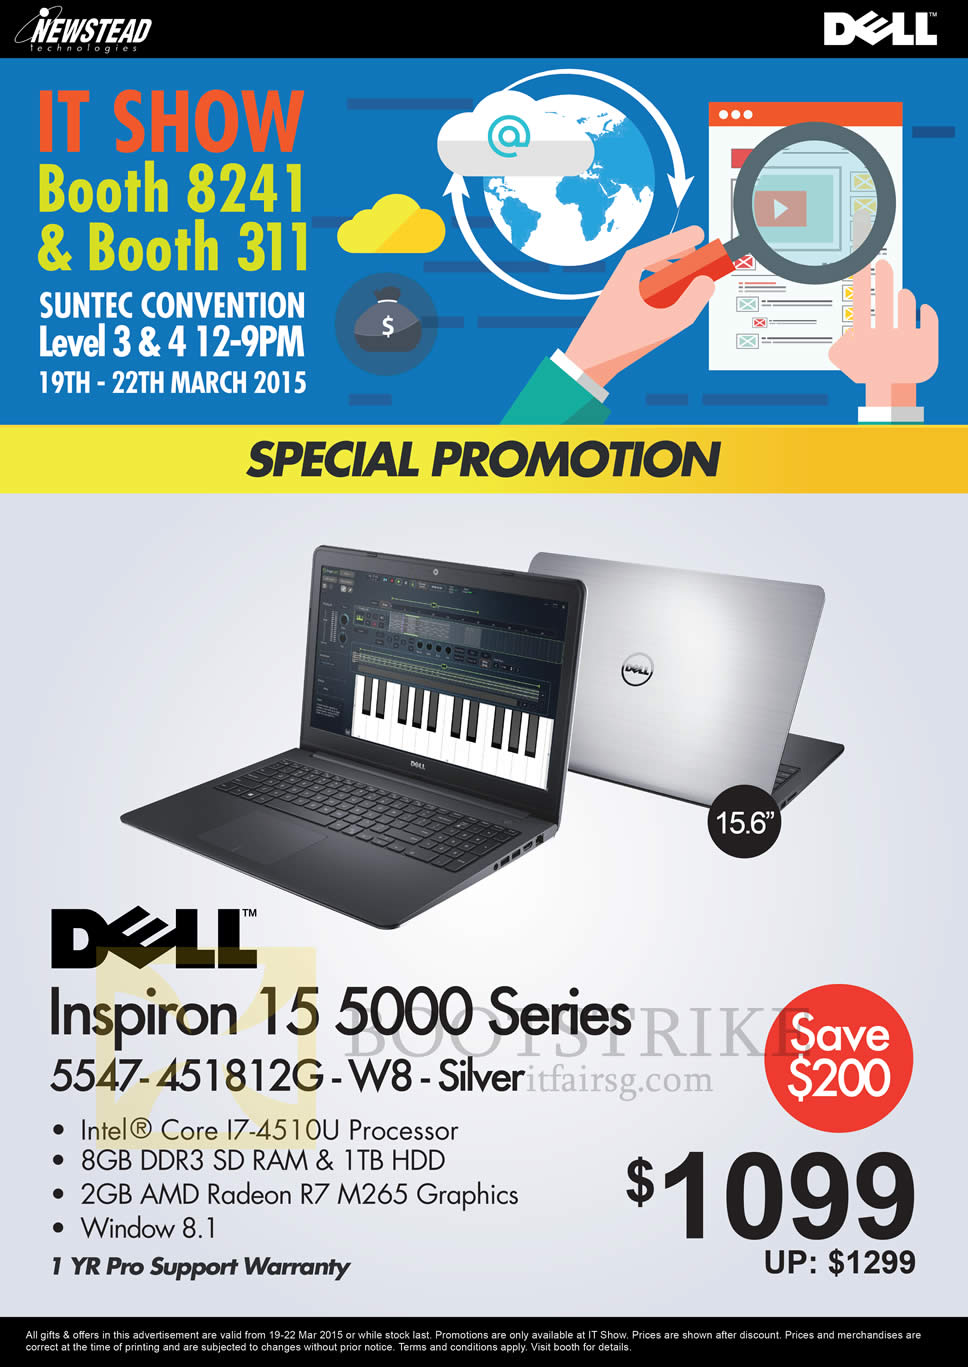 IT SHOW 2015 price list image brochure of Dell Newstead Inspiron 15 5000 Series Notebook